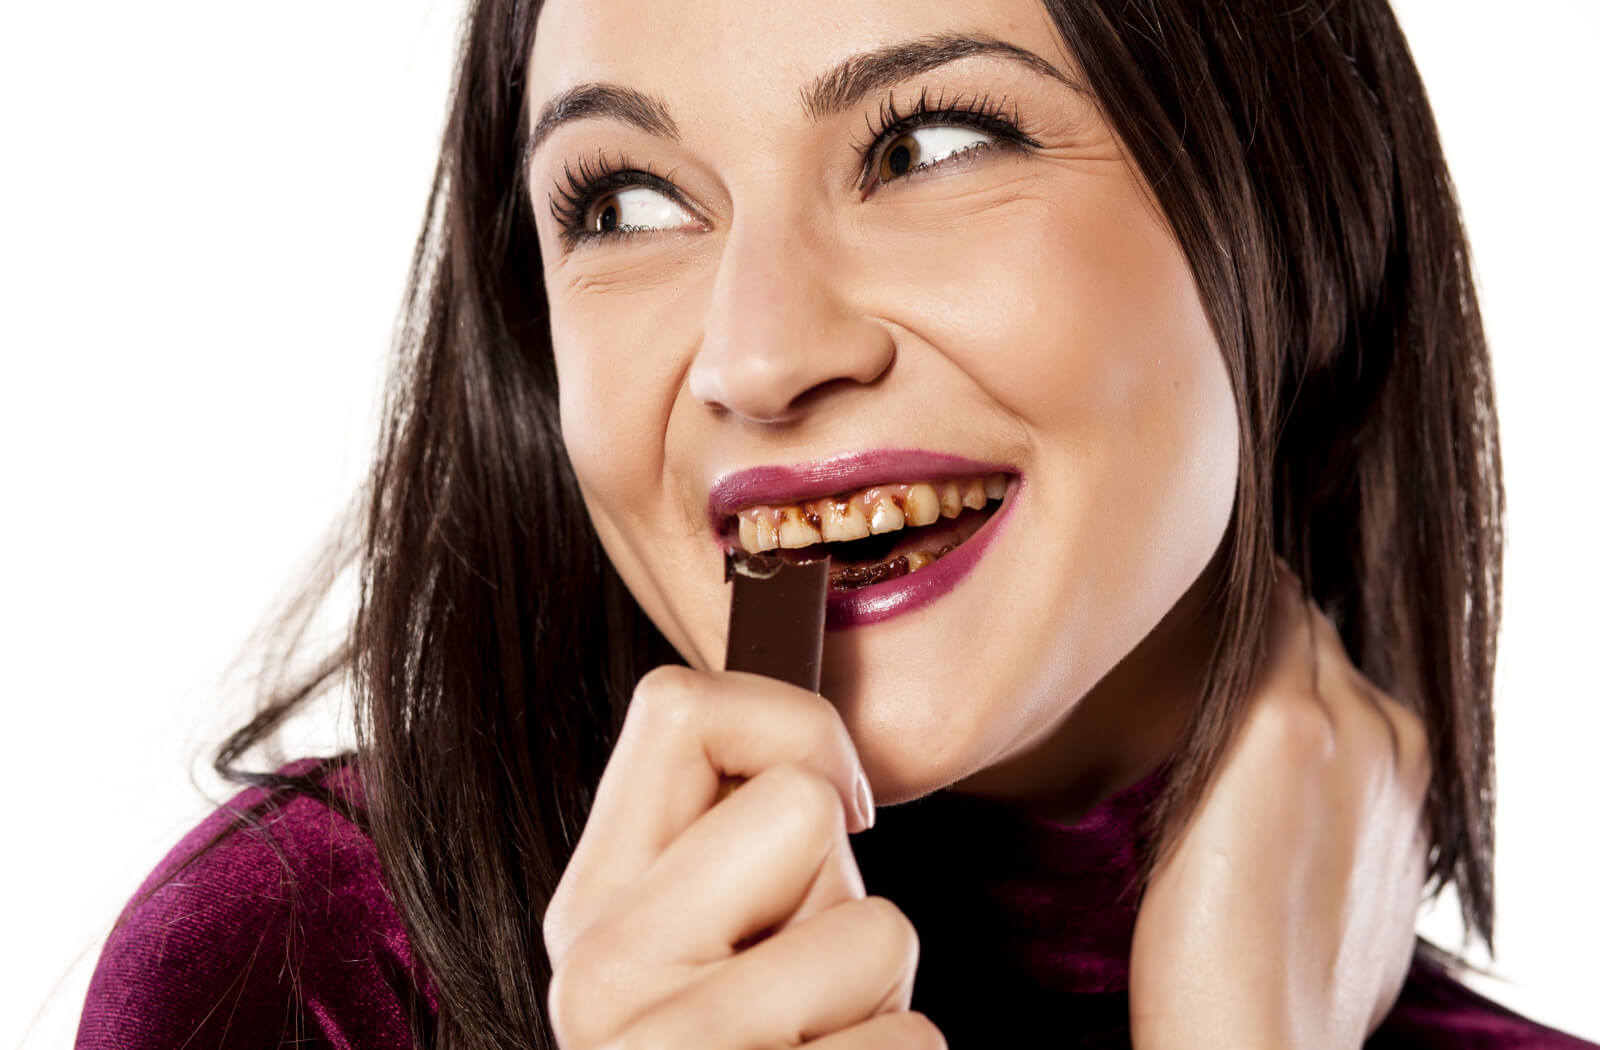 A woman with stained teeth from eating a bar of chocolate.
